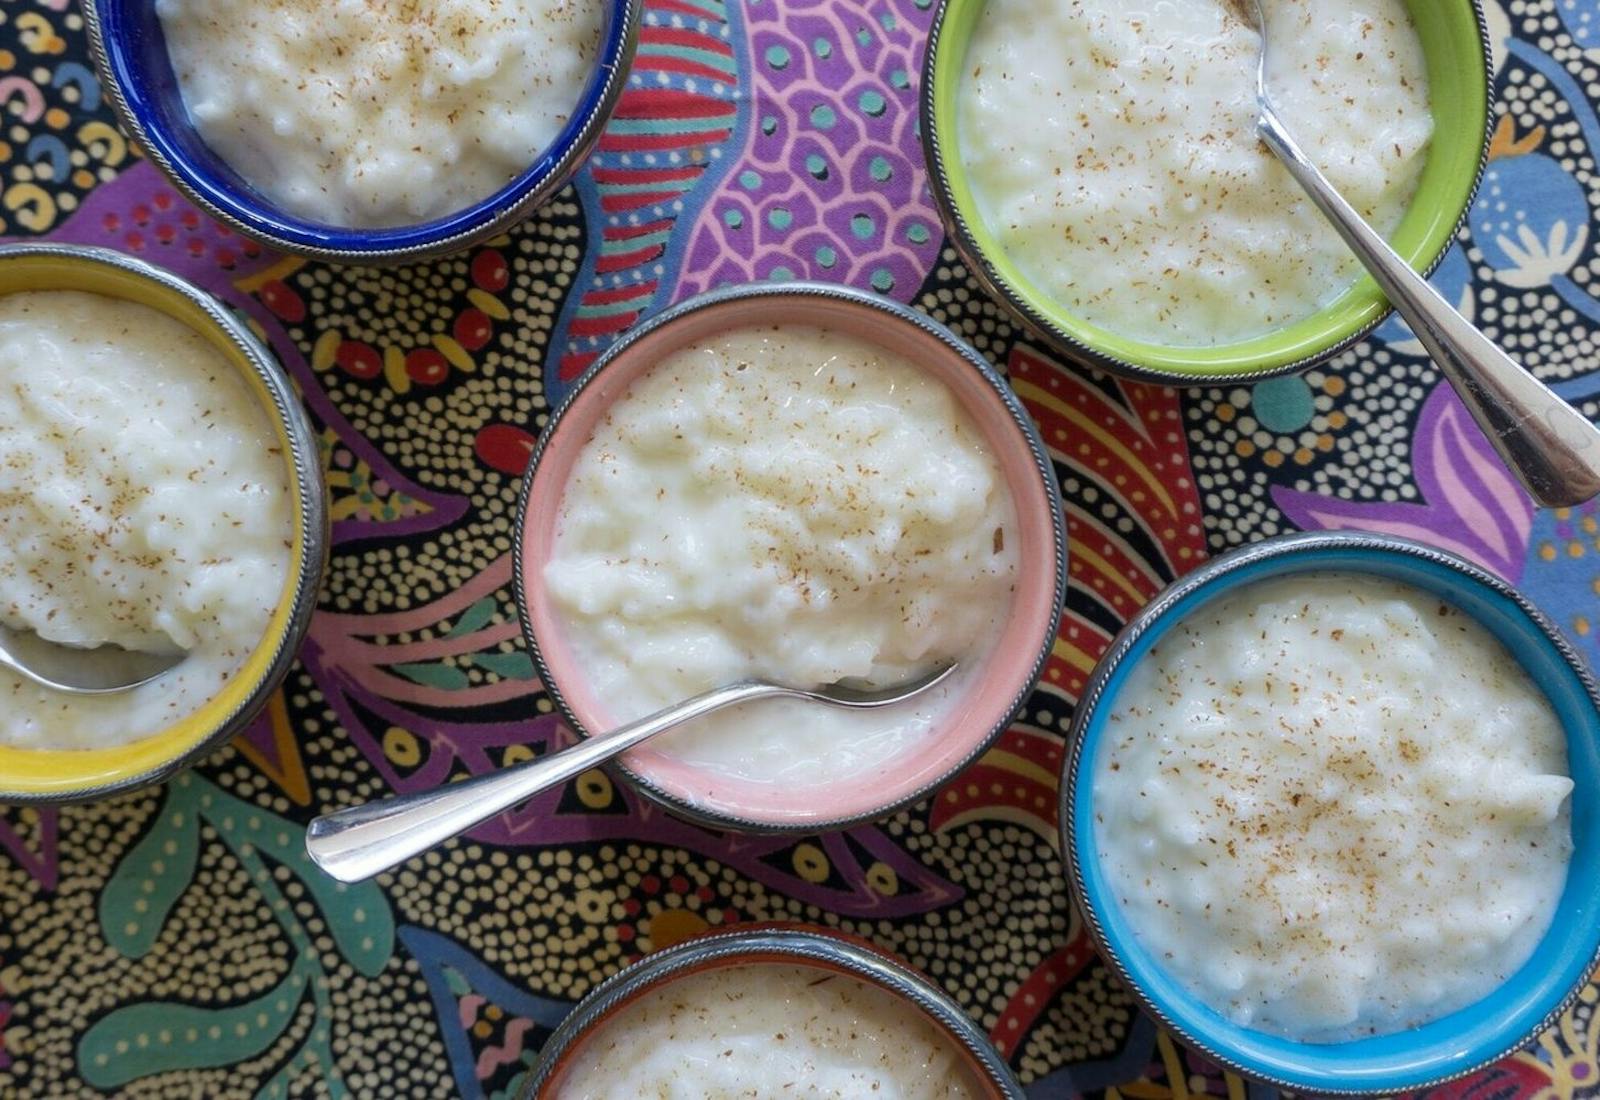 Colorful bowls filled with rice pudding garnished with cinnamon atop vibrant print tablecloth.